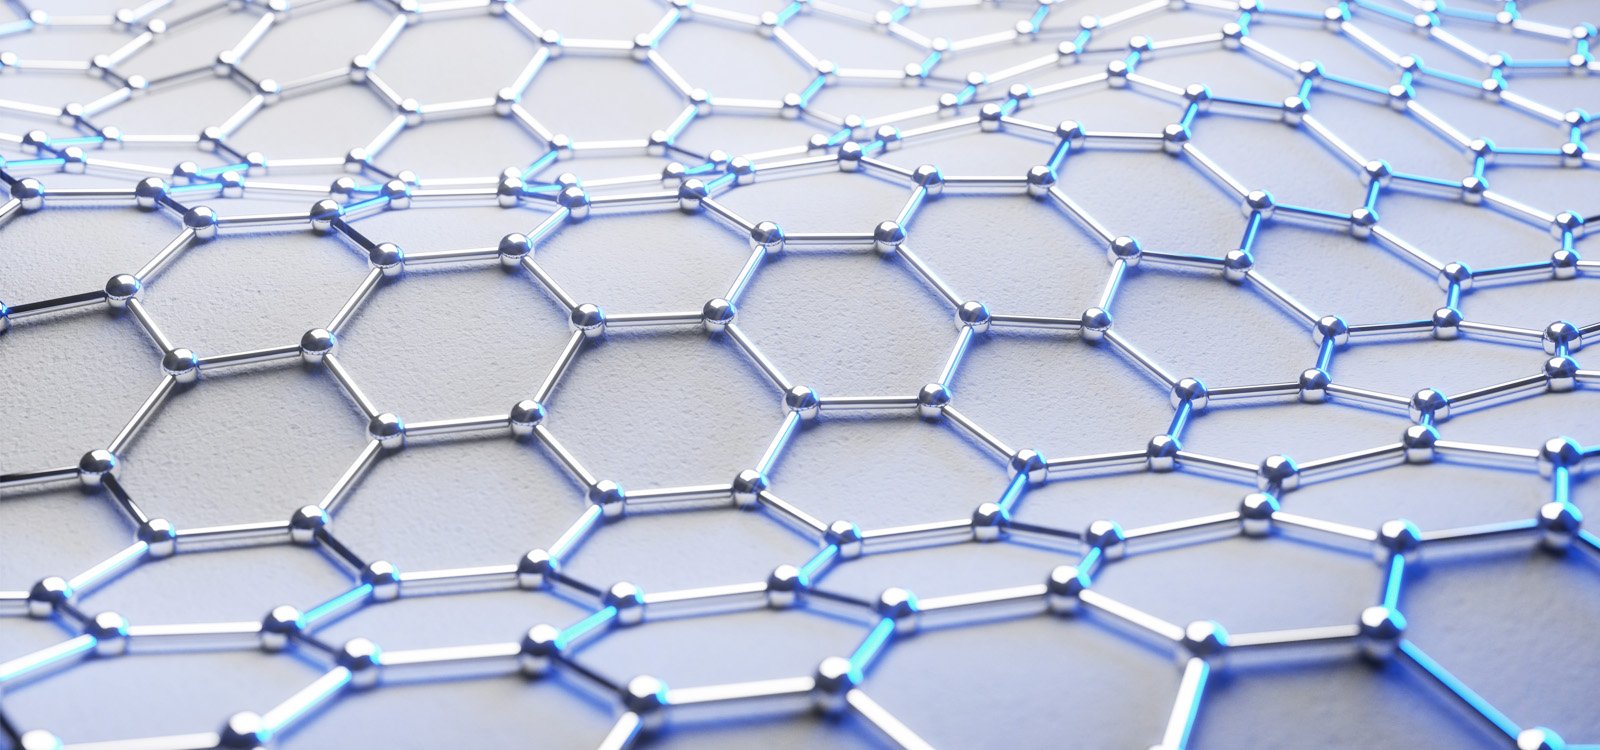 <p>Graphene is just one atom thick, and is the thinnest, strongest material in the world today.</p>
